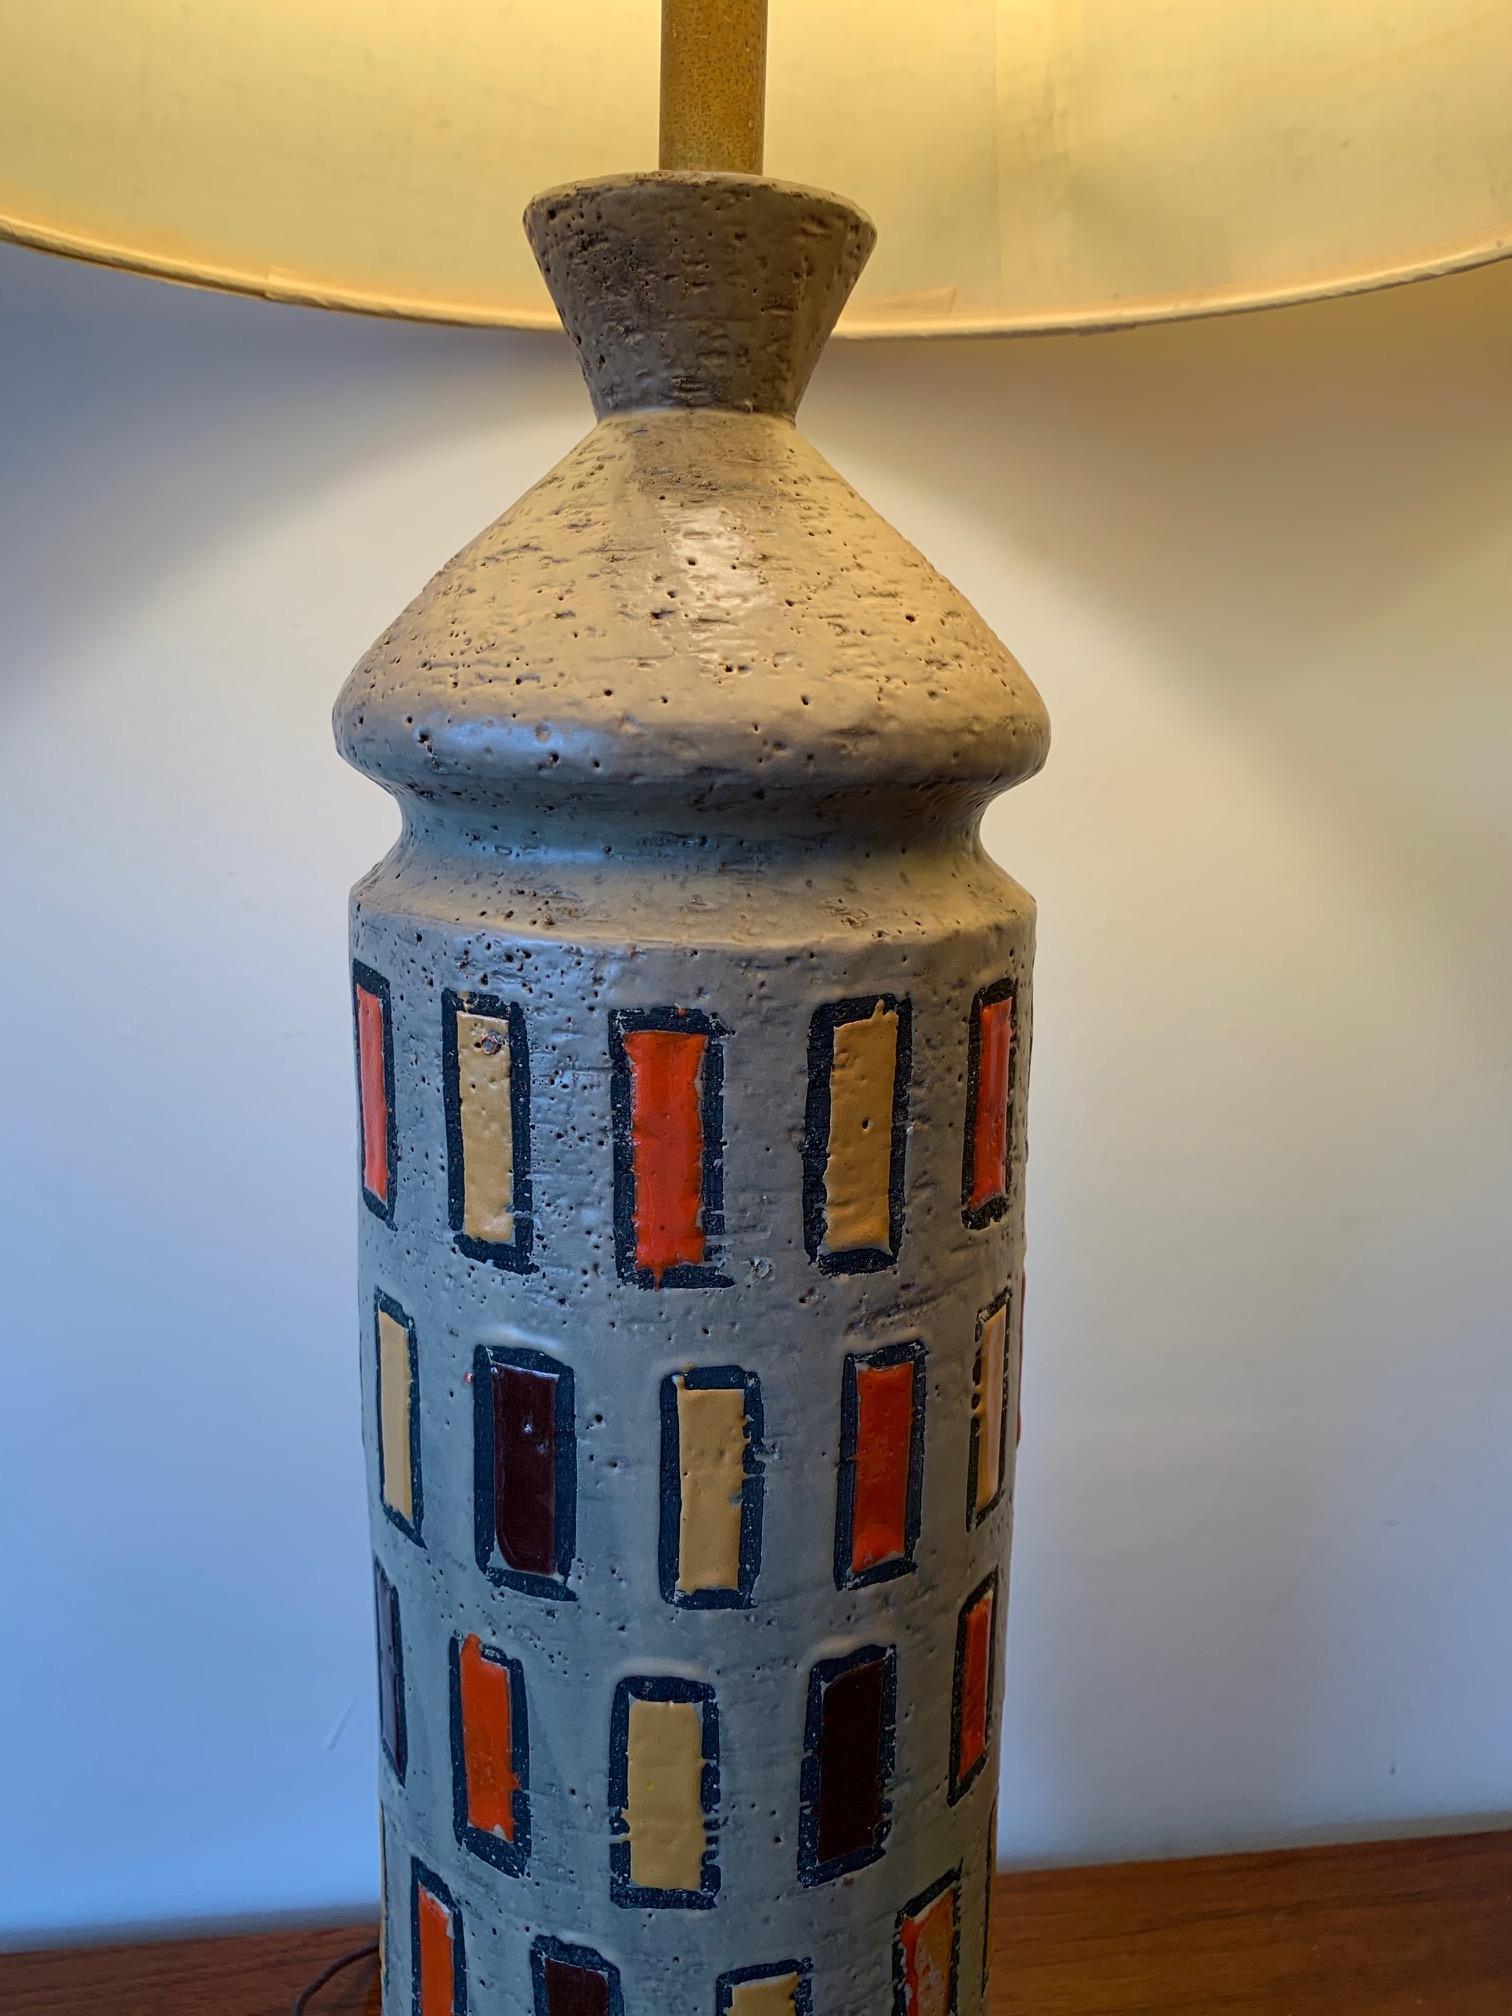 An pair of unusual, ceramic lamps by Bitossi, Italy, circa 1960s. Whimsical decoration, typical of the period with bold yellow, orange and brown rectangles.